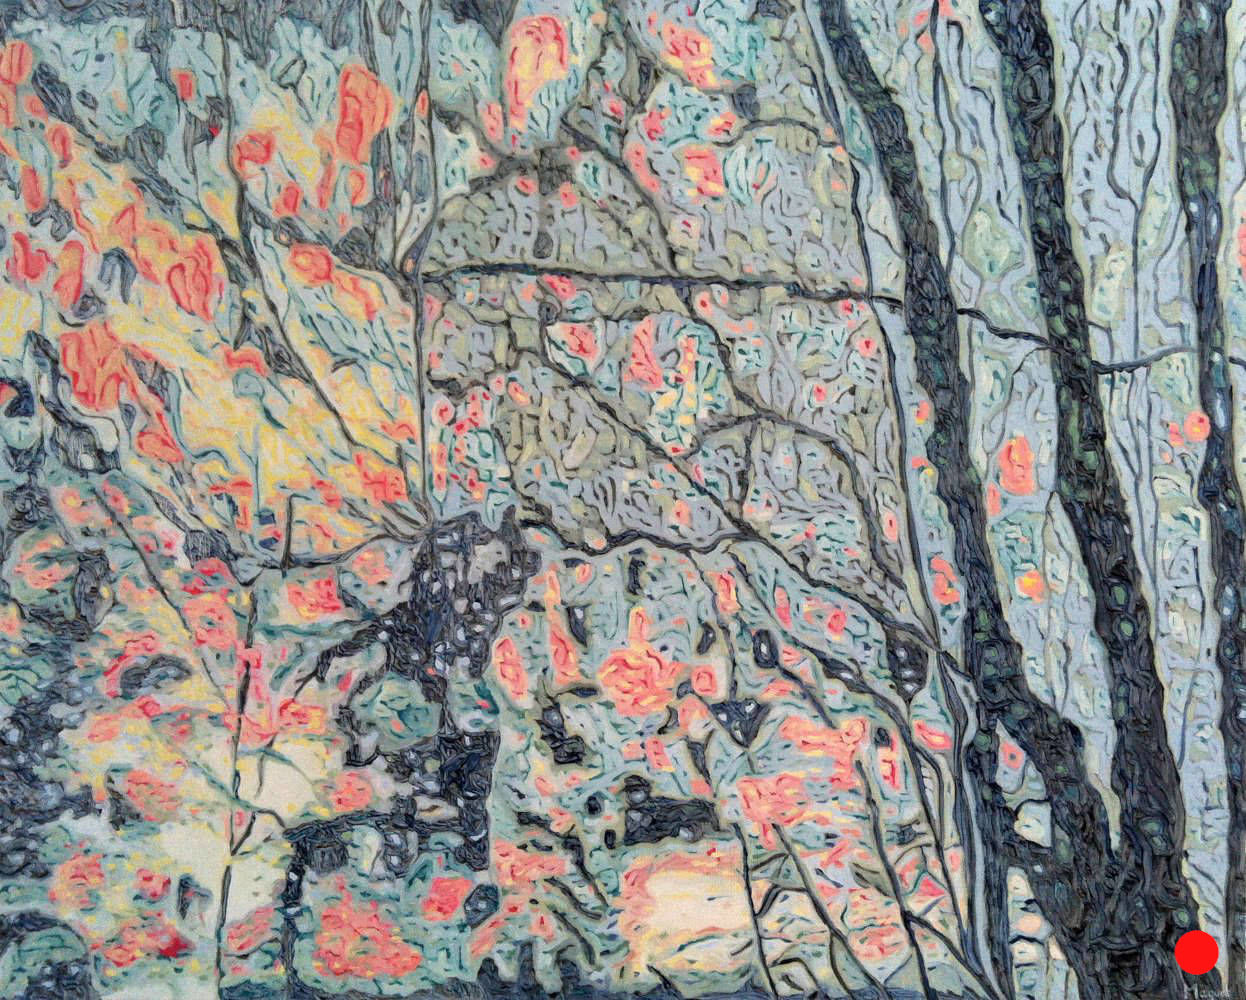 Euphorie 2: Landscape tree contemporary painting Nathalie Maquet SOLD